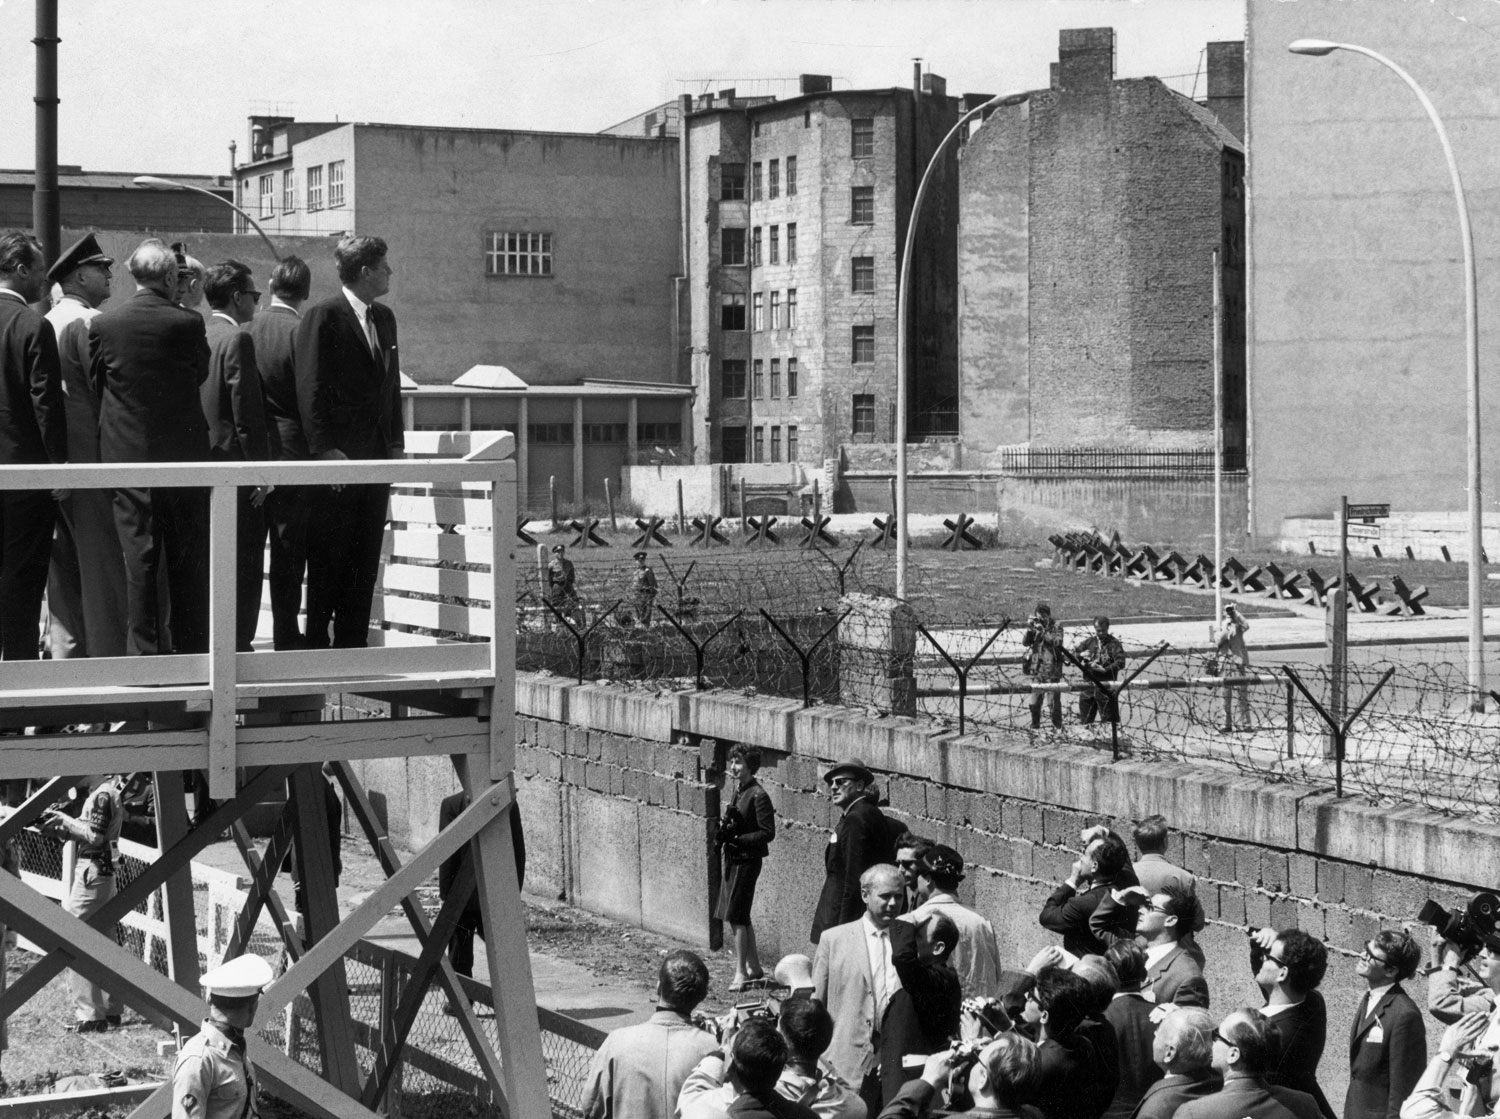 From a viewing stand, President John F. Kennedy gazes over the Berlin Wall into East Germany, June 1963.